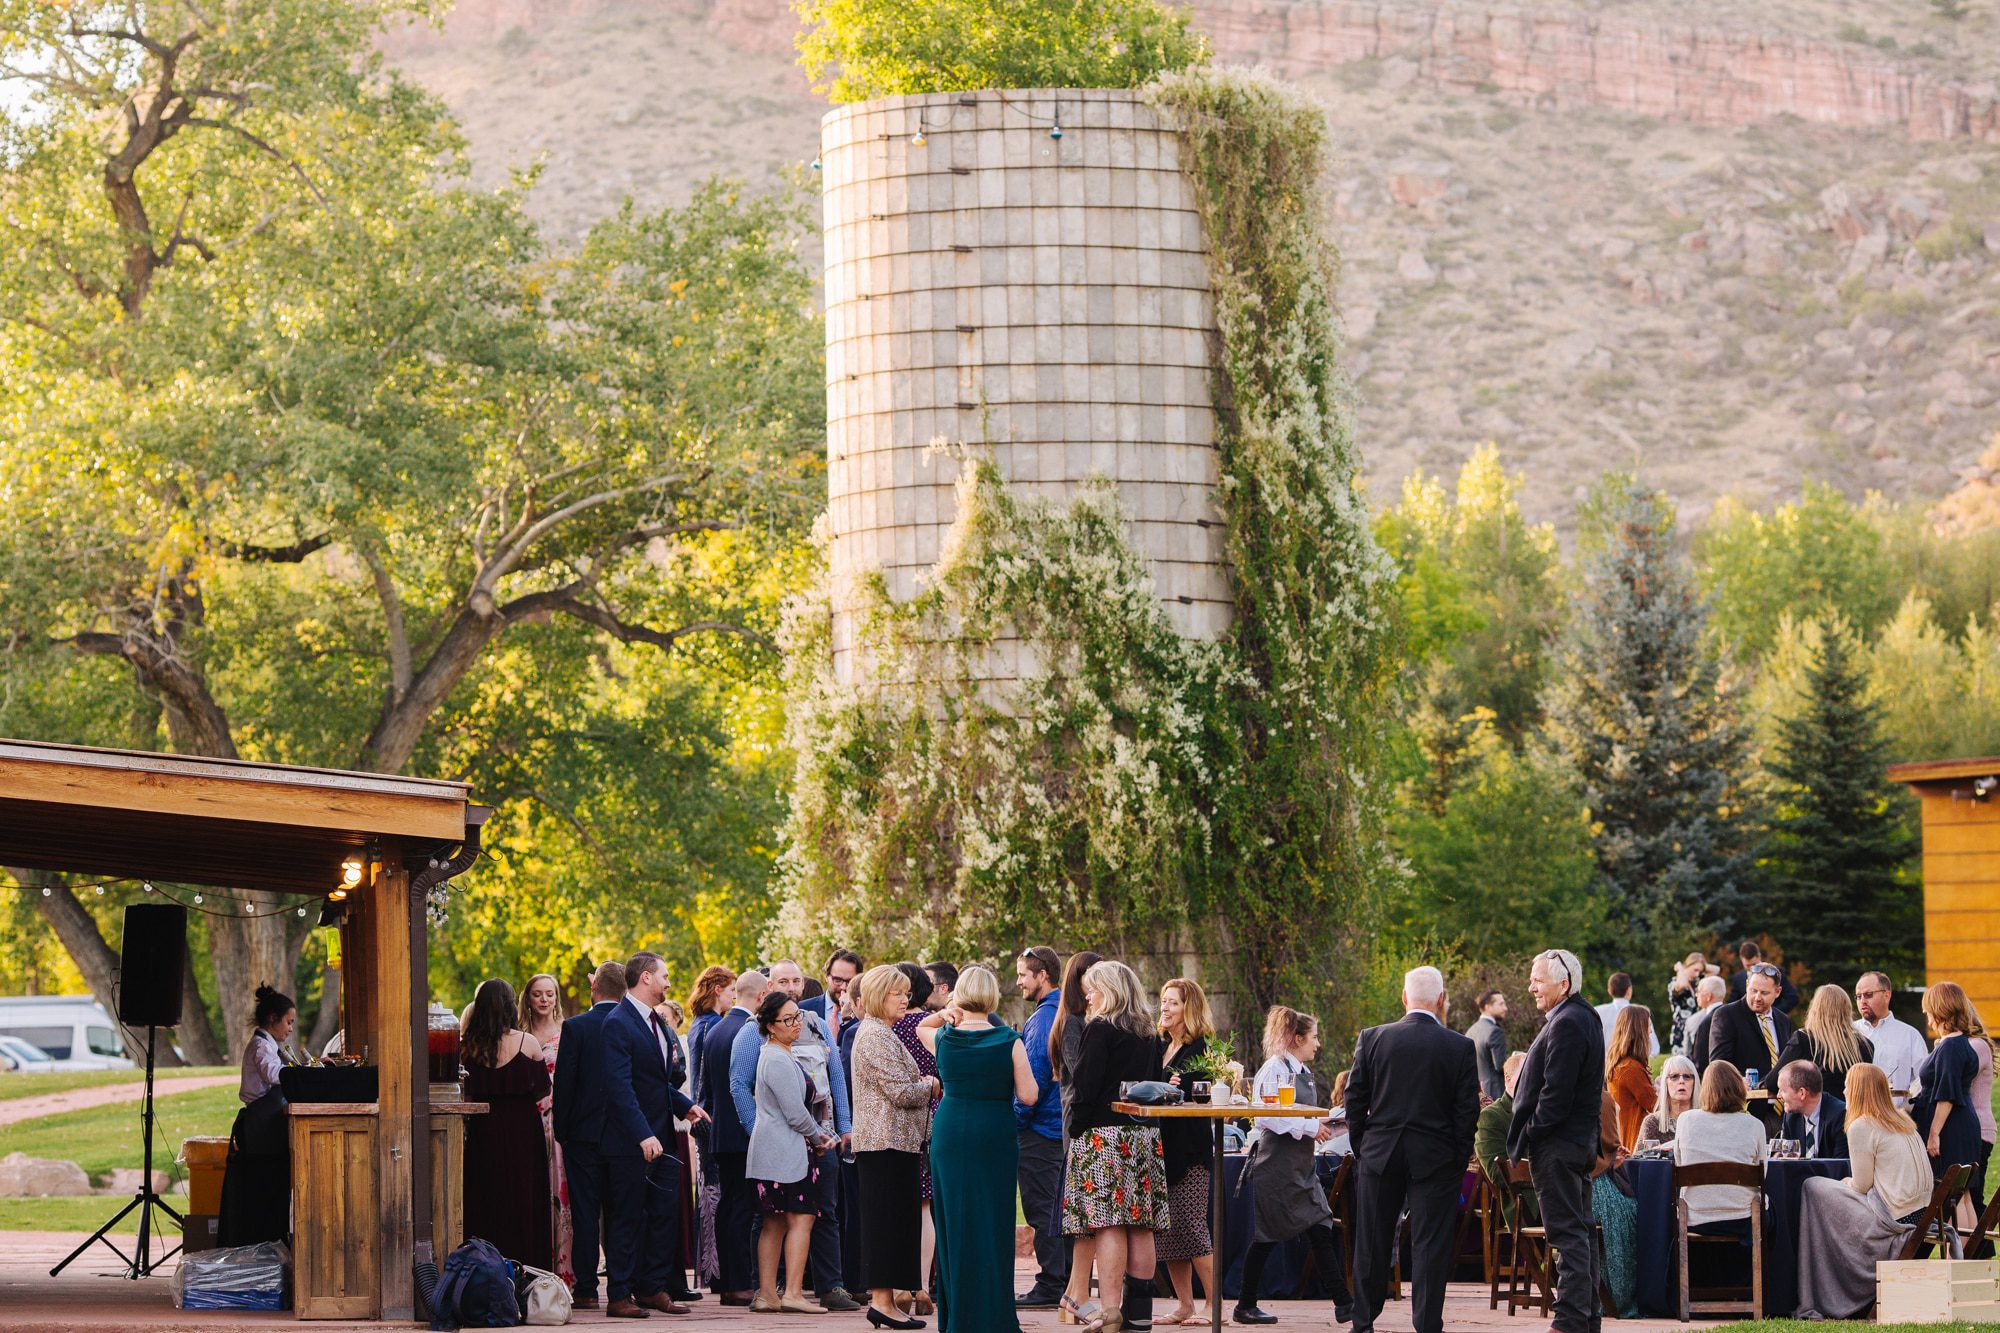 planet bluegrass wedding, outdoor wedding venue, cocktail hour outside, outdoor cocktail hour, lyons colorado wedding venue, summer wedding